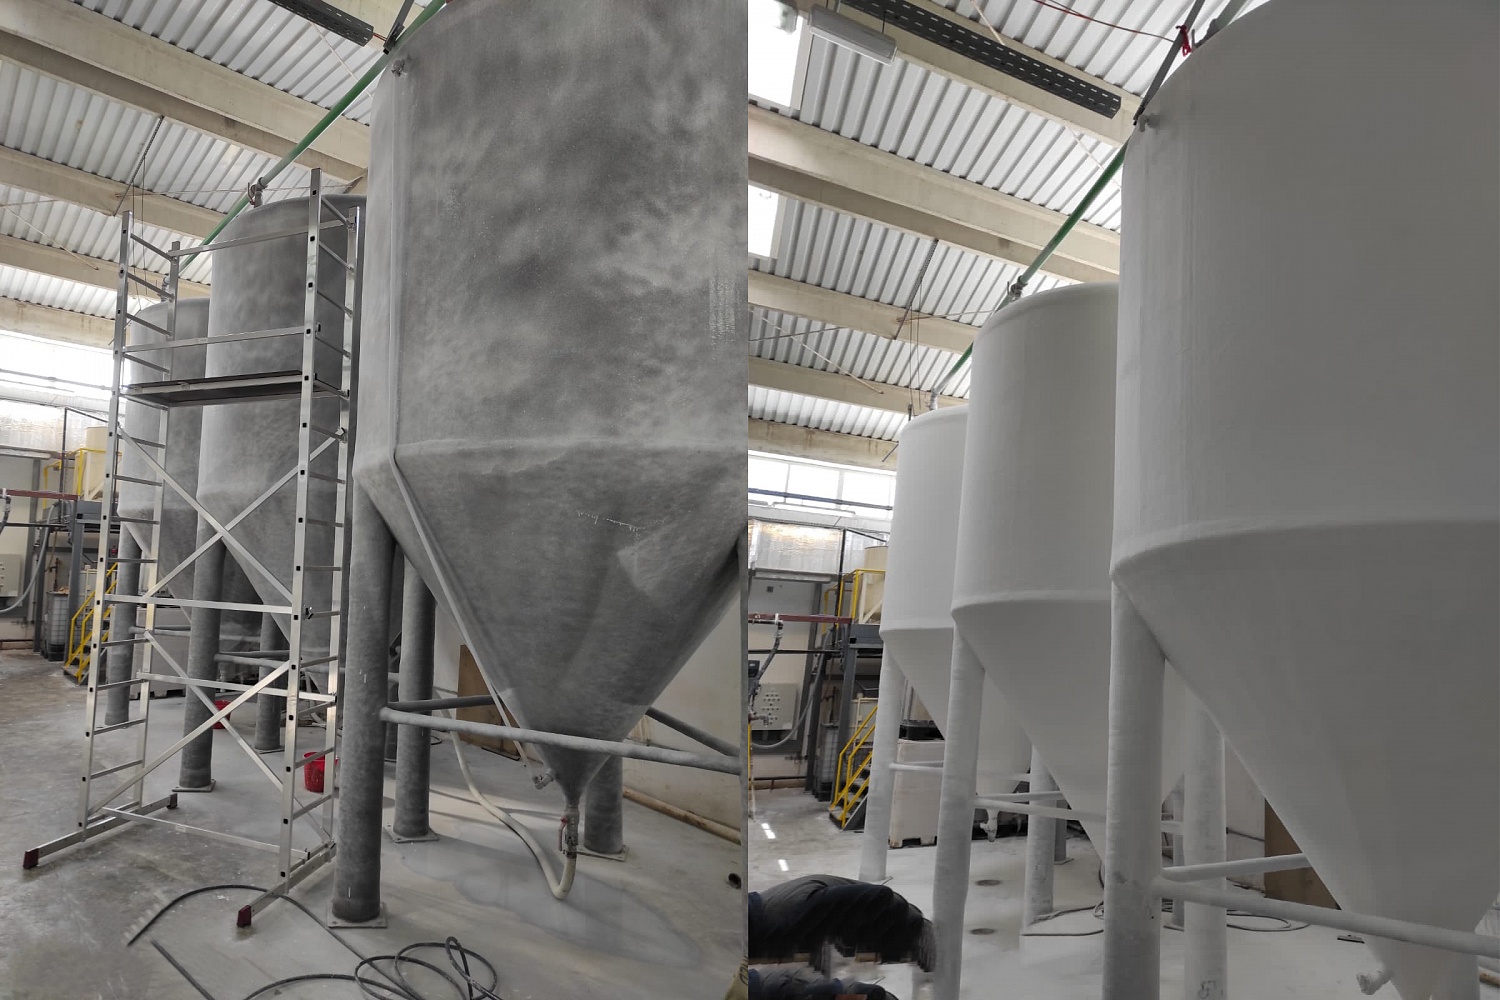 Thermal insulation Bronya on the tanks of a dry fuel plant. Croatia (photo)